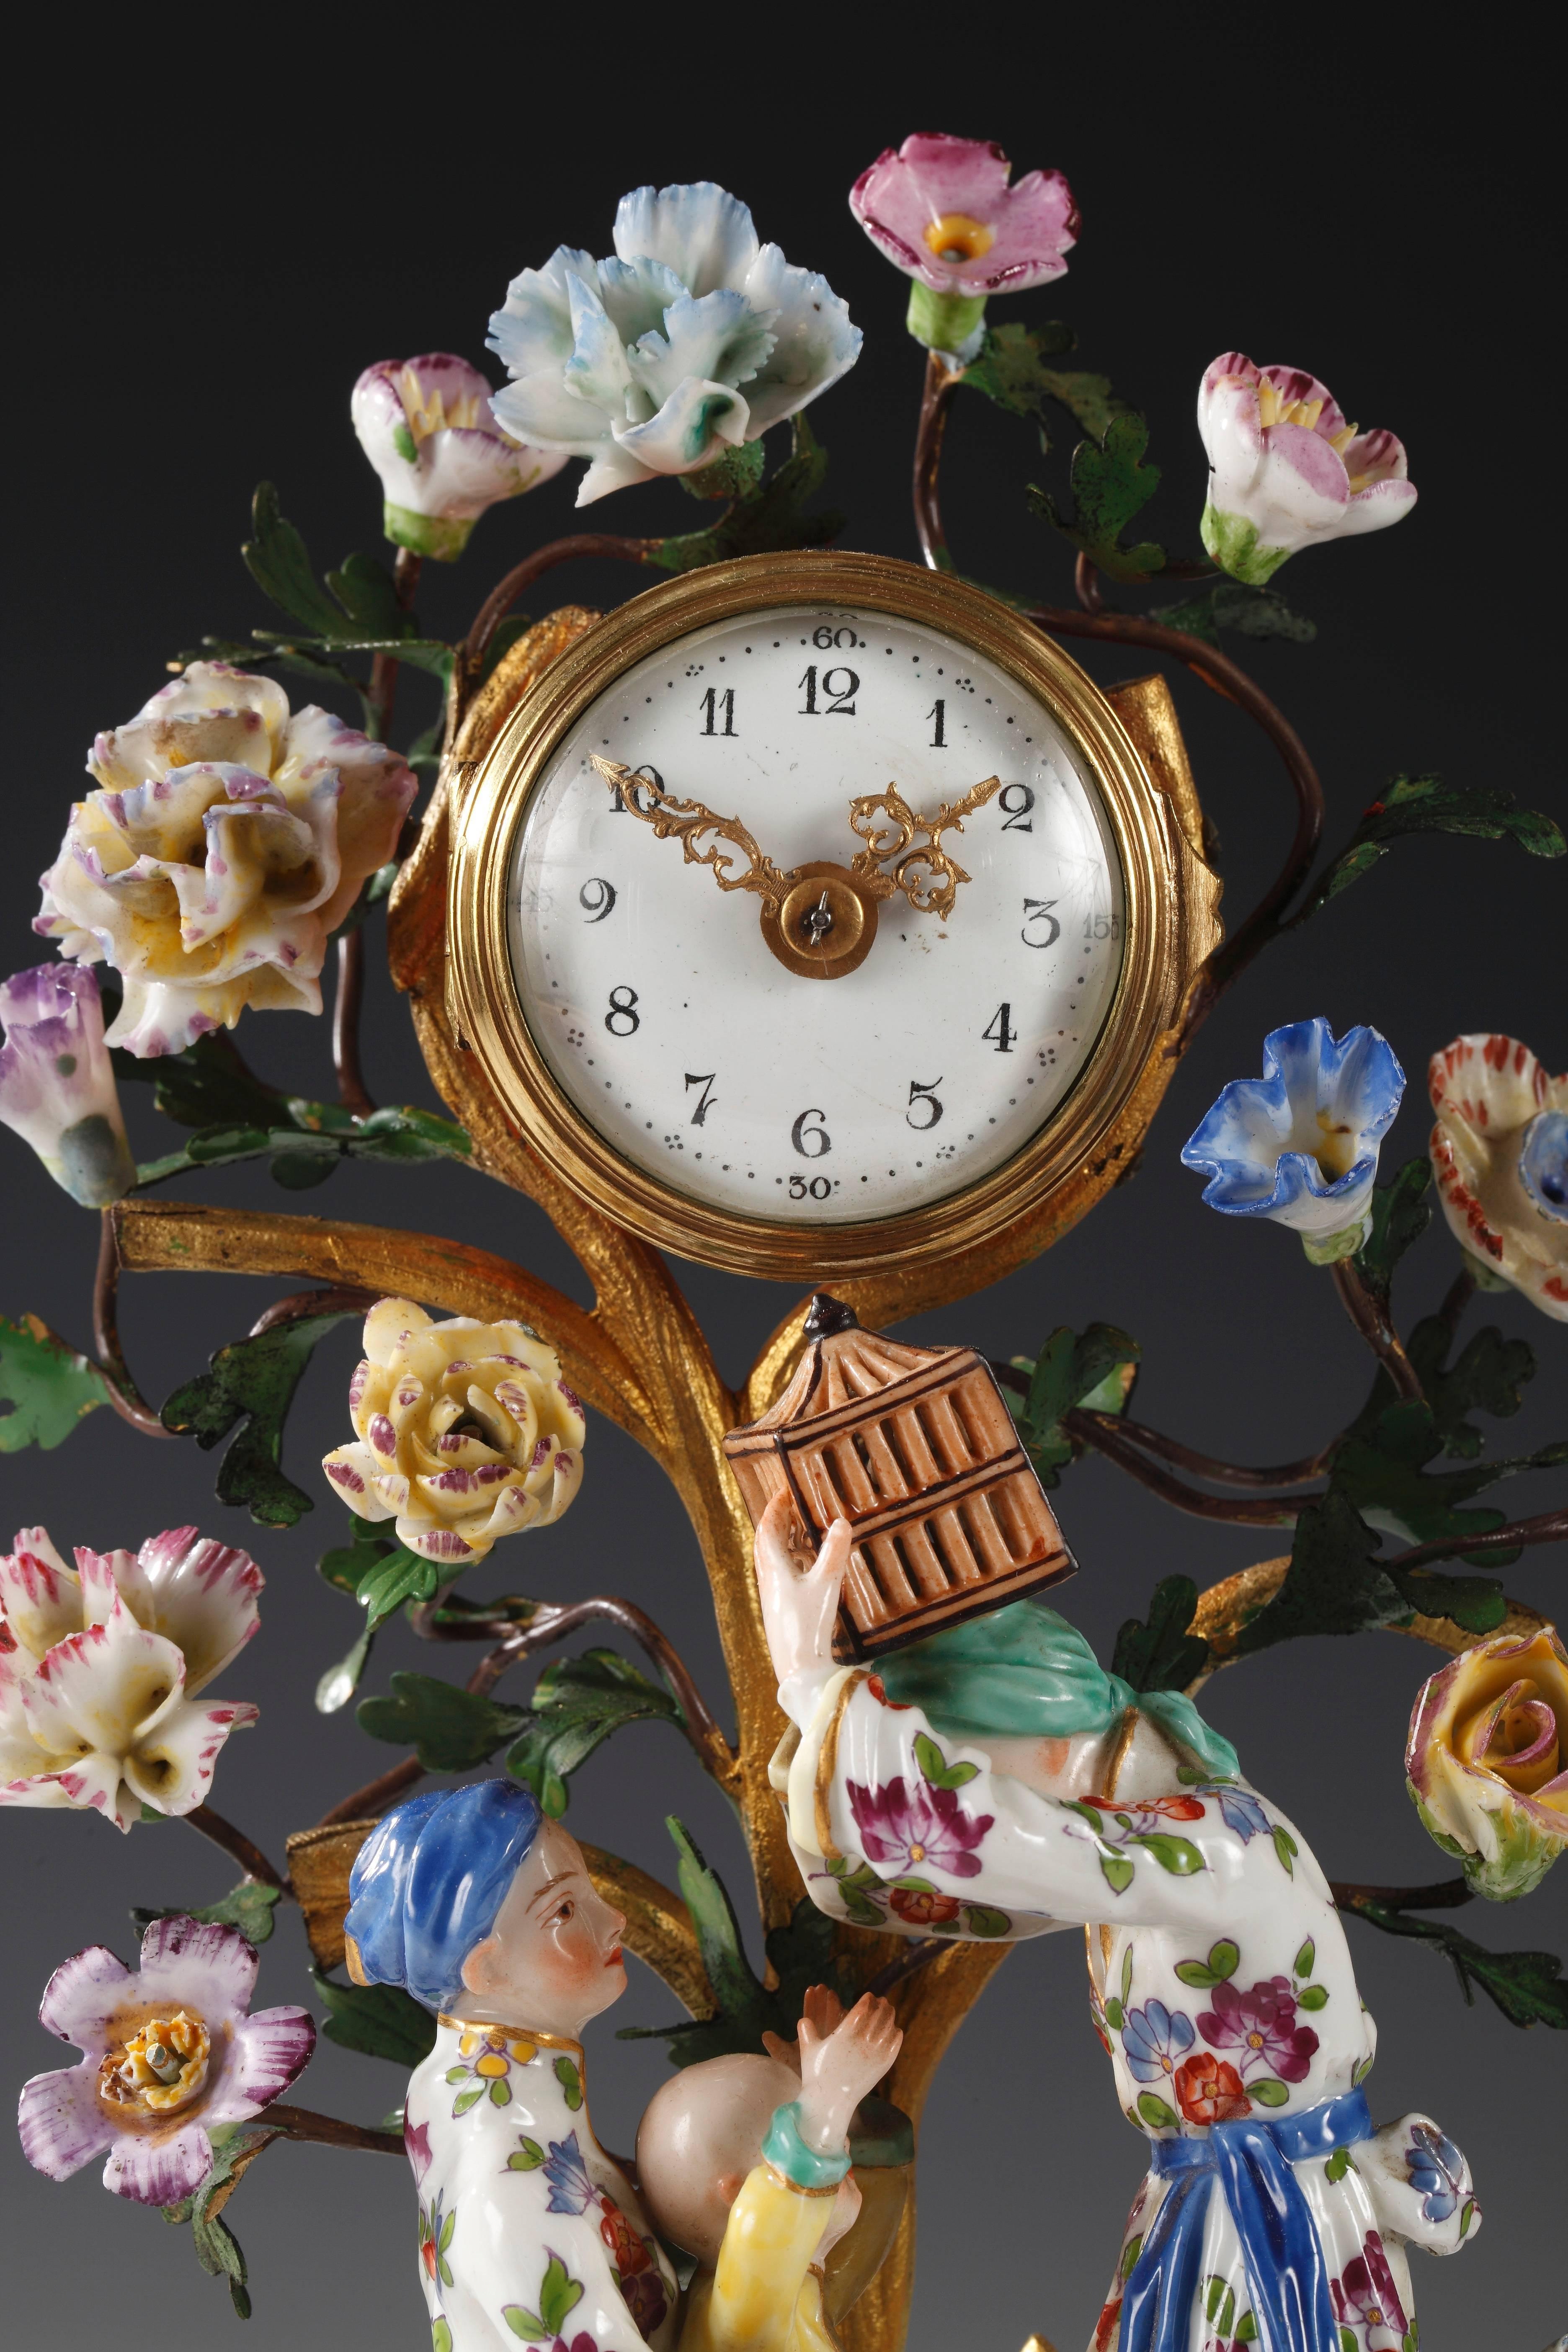 Small gilt bronze and polychrome porcelain clock figuring Chinese characters. Porcelain flowers embellish the overall. Issuing from scrolling foliage base.